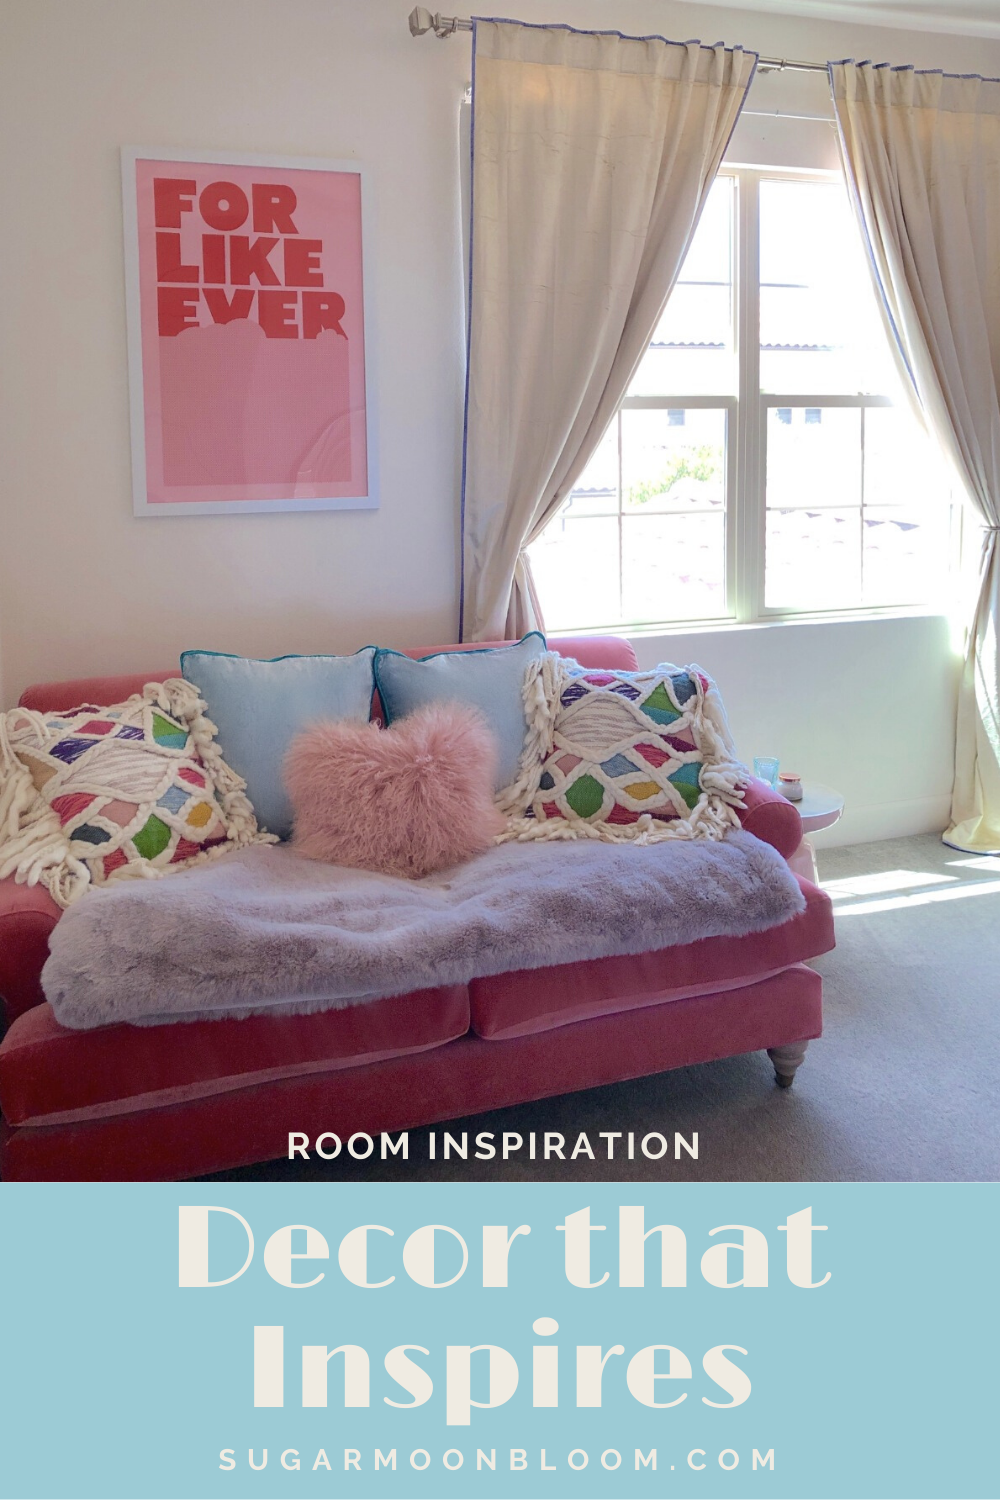 Decor that inspires room inspiration (2).png